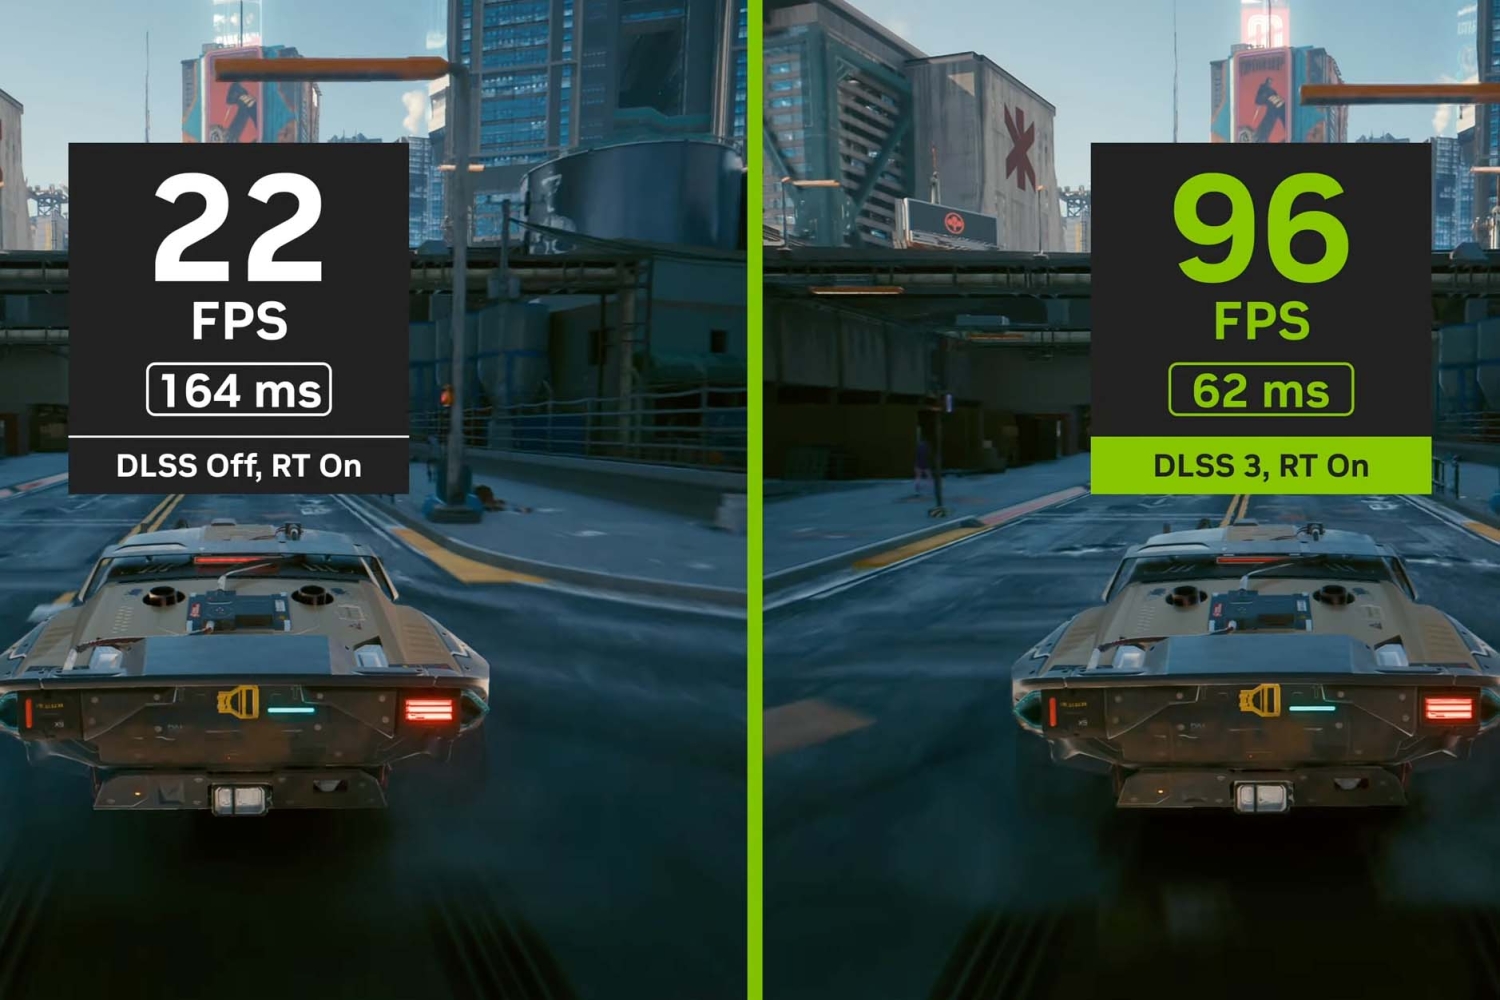 NVIDIA teases Ray Tracing: Overdrive, RTXDI, DLSS 3 for Cyberpunk 2077